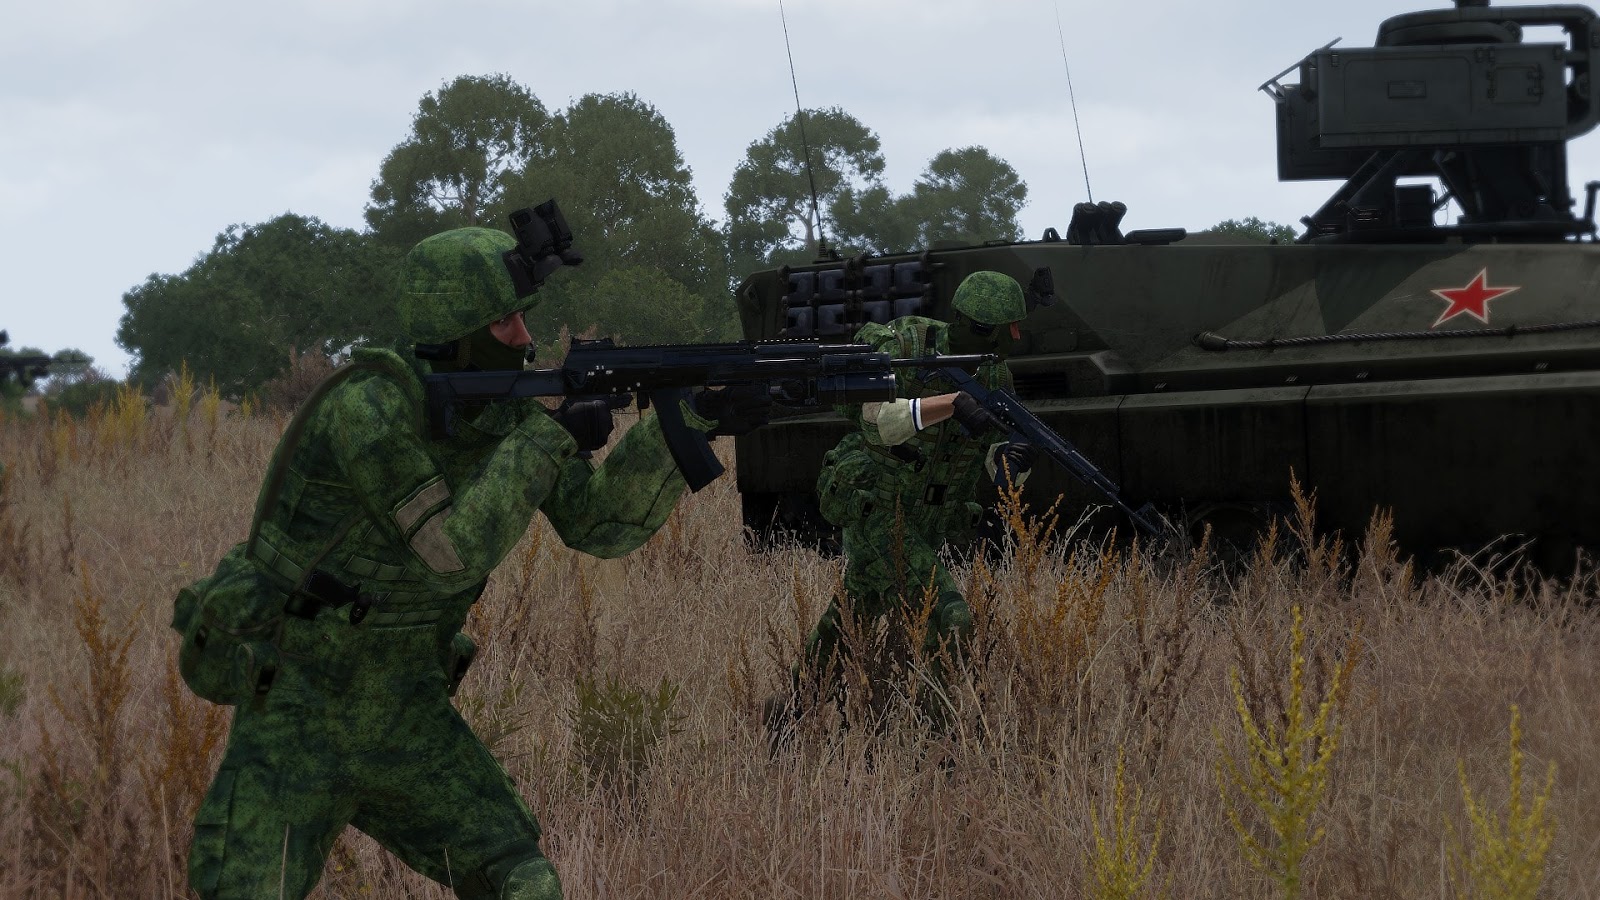 Арма 3 рф. Арма 3 Russian Armed Forces 2035. Арма 3 армия России 2035. Arma 3 Russian Army. Arma 2 Russian Armed Forces Art солдат РФ.